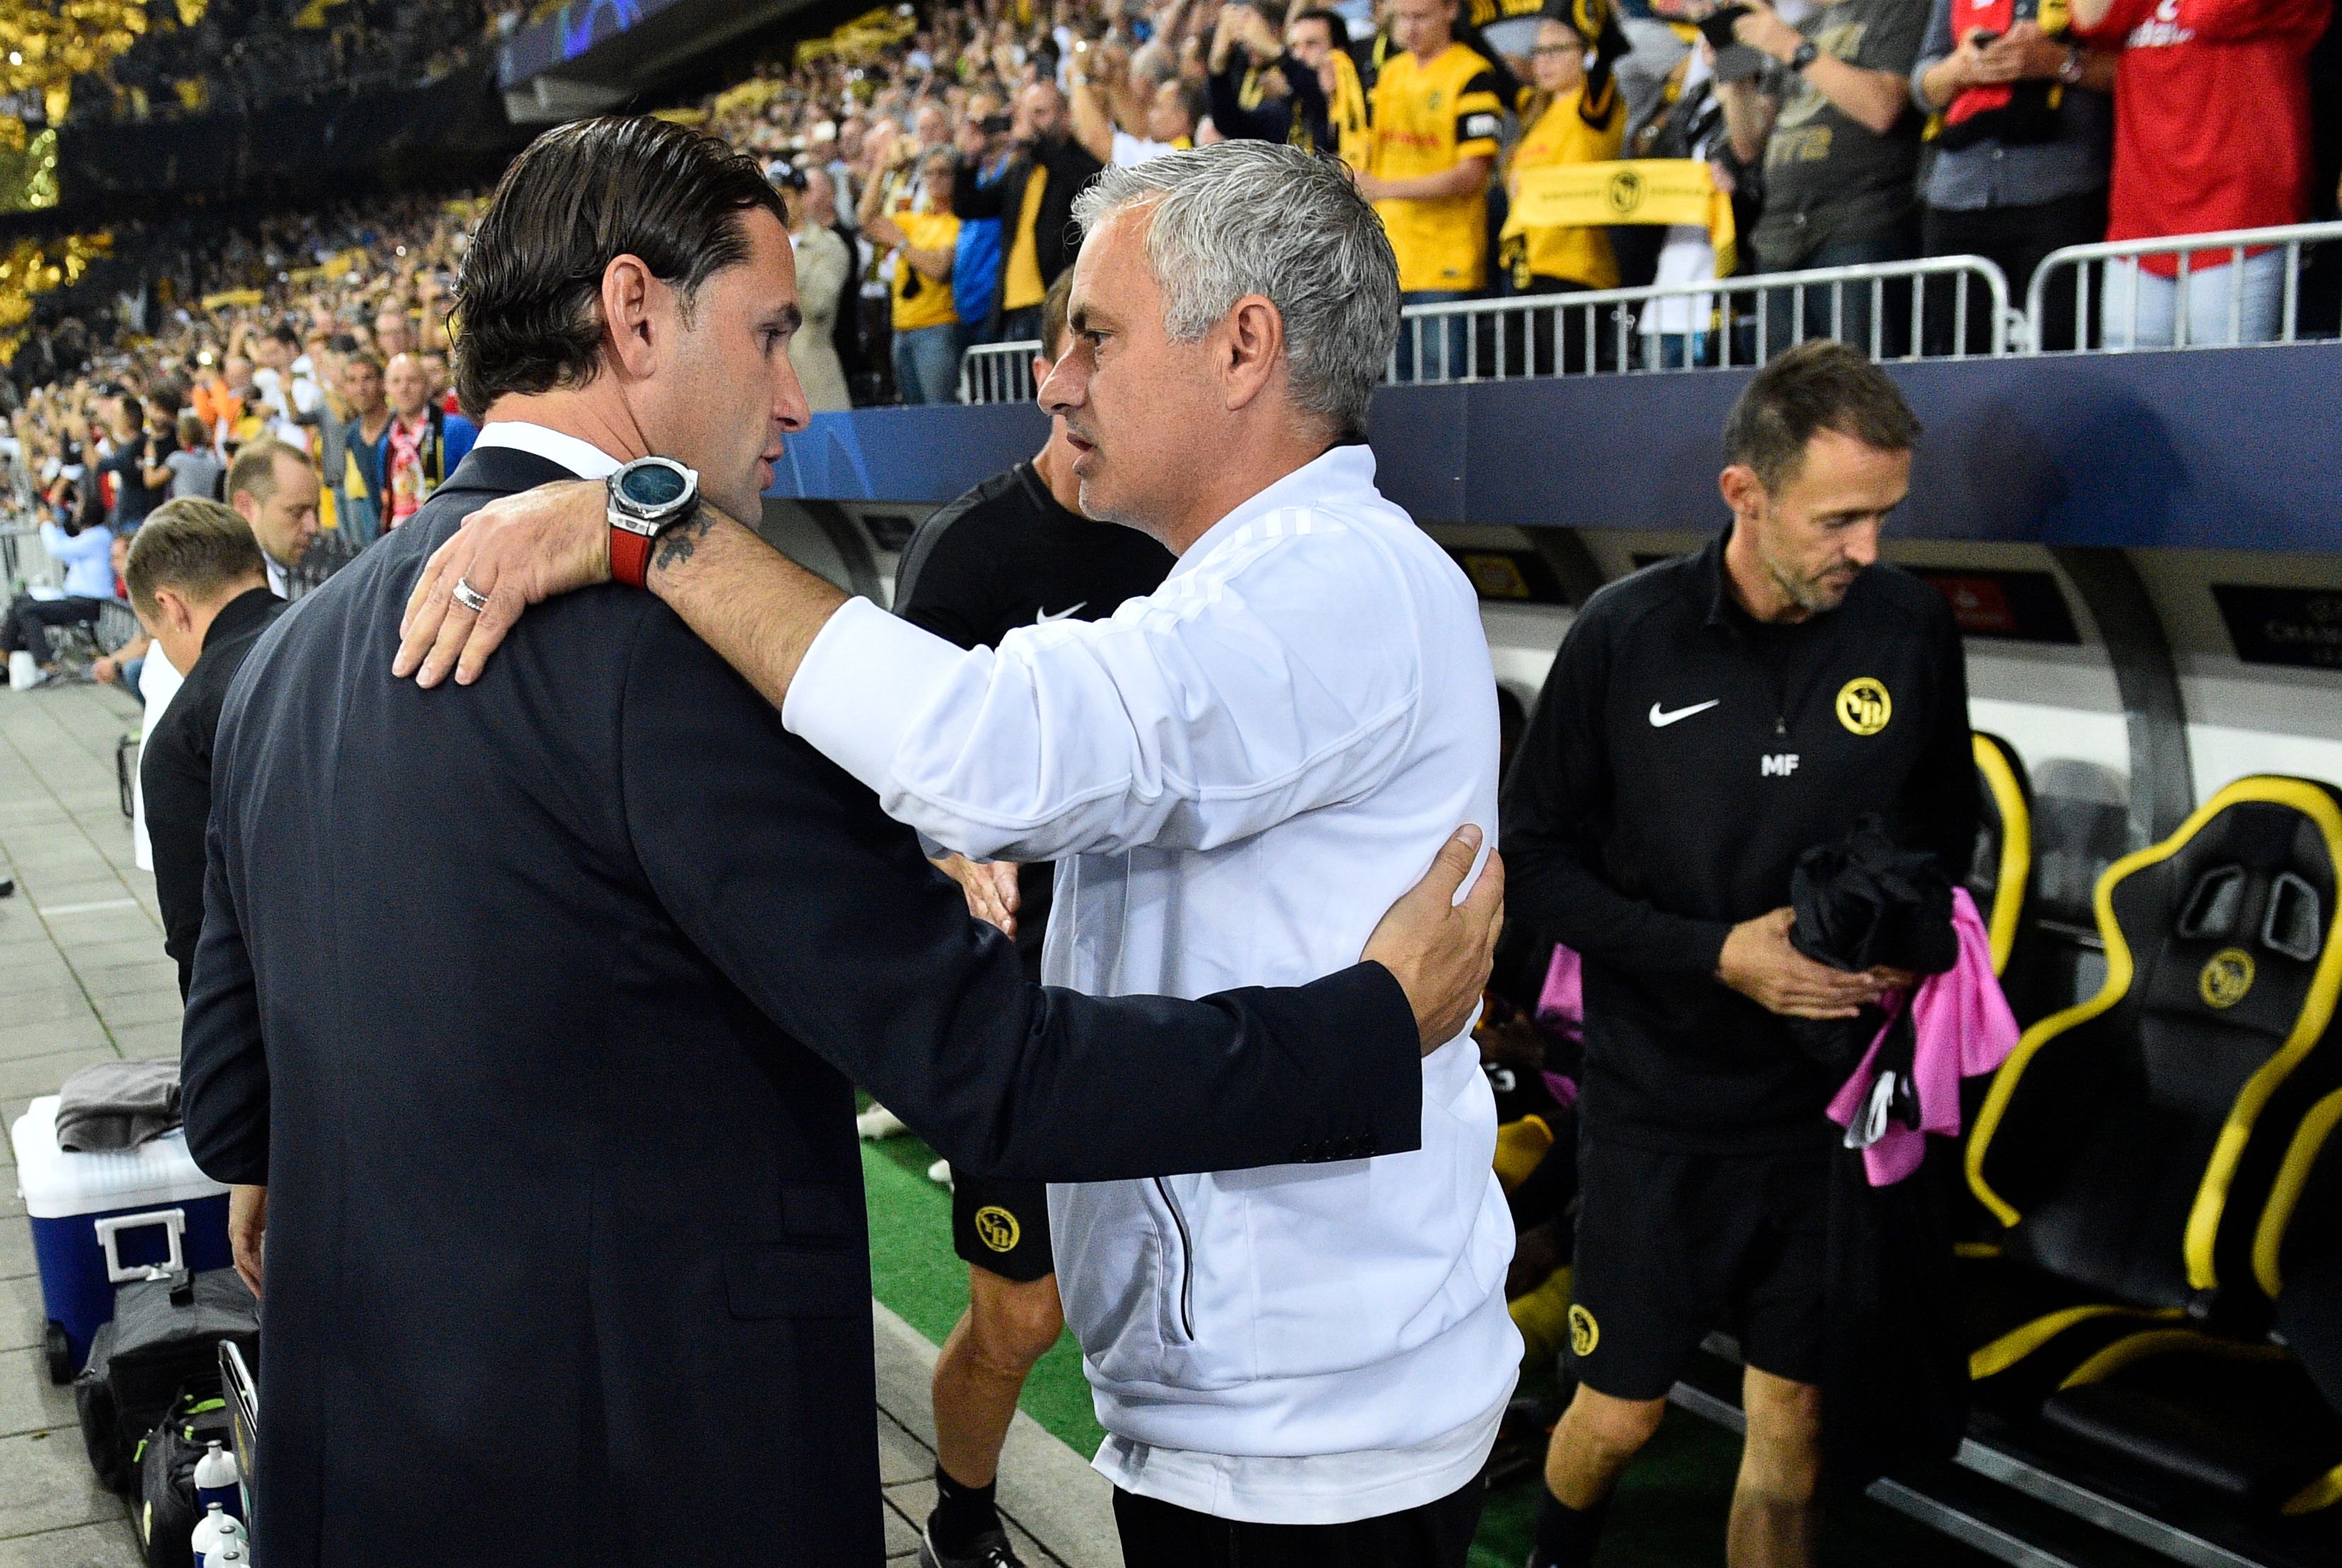 Manchester United's Portuguese manager Jose Mourinho (C) embraces Young Boys Swiss head coach Gerardo Seoane ahead of the UEFA Champions League group H football match between Young Boys and Manchester United at The Stade de Suisse in Bern on September 19, 2018. (Photo by Alain GROSCLAUDE / AFP)        (Photo credit should read ALAIN GROSCLAUDE/AFP/Getty Images)